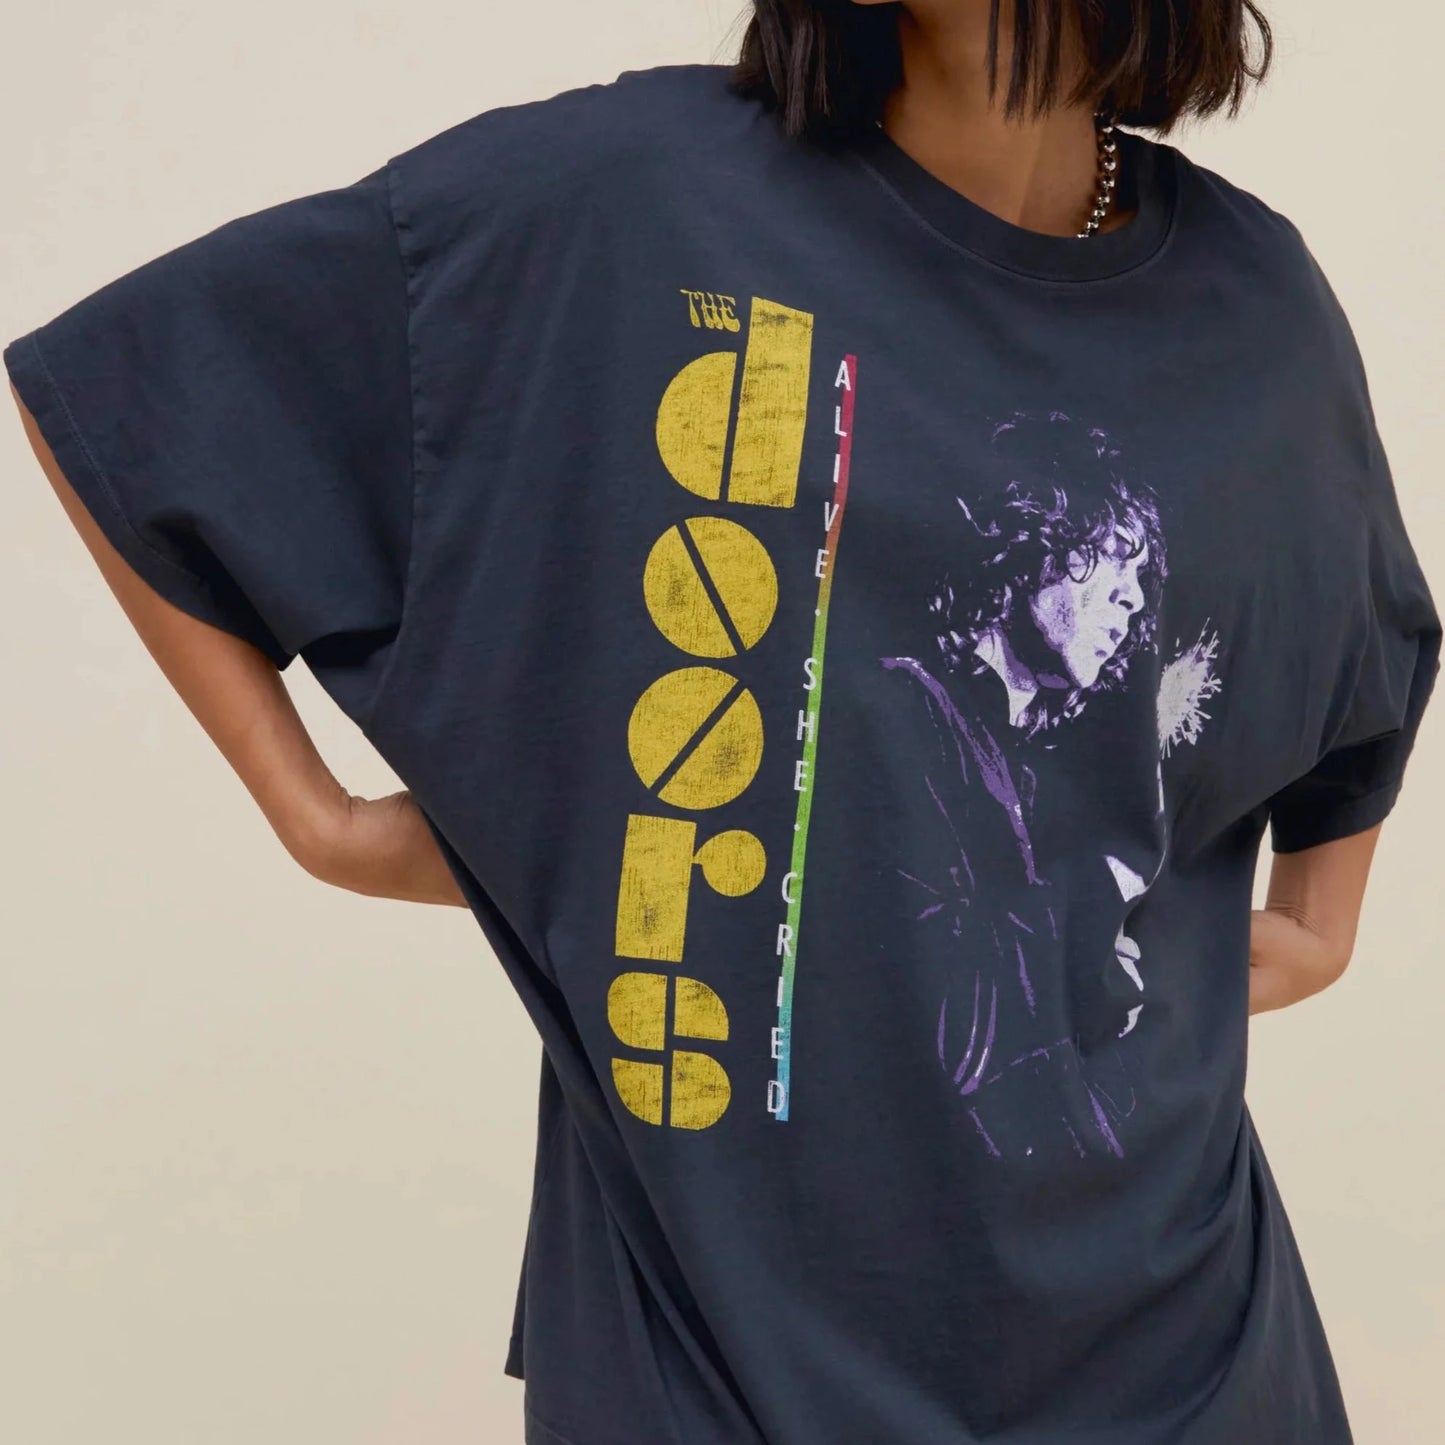 The Doors ‘Alive She Cried’ OS Tee - Vintage Black